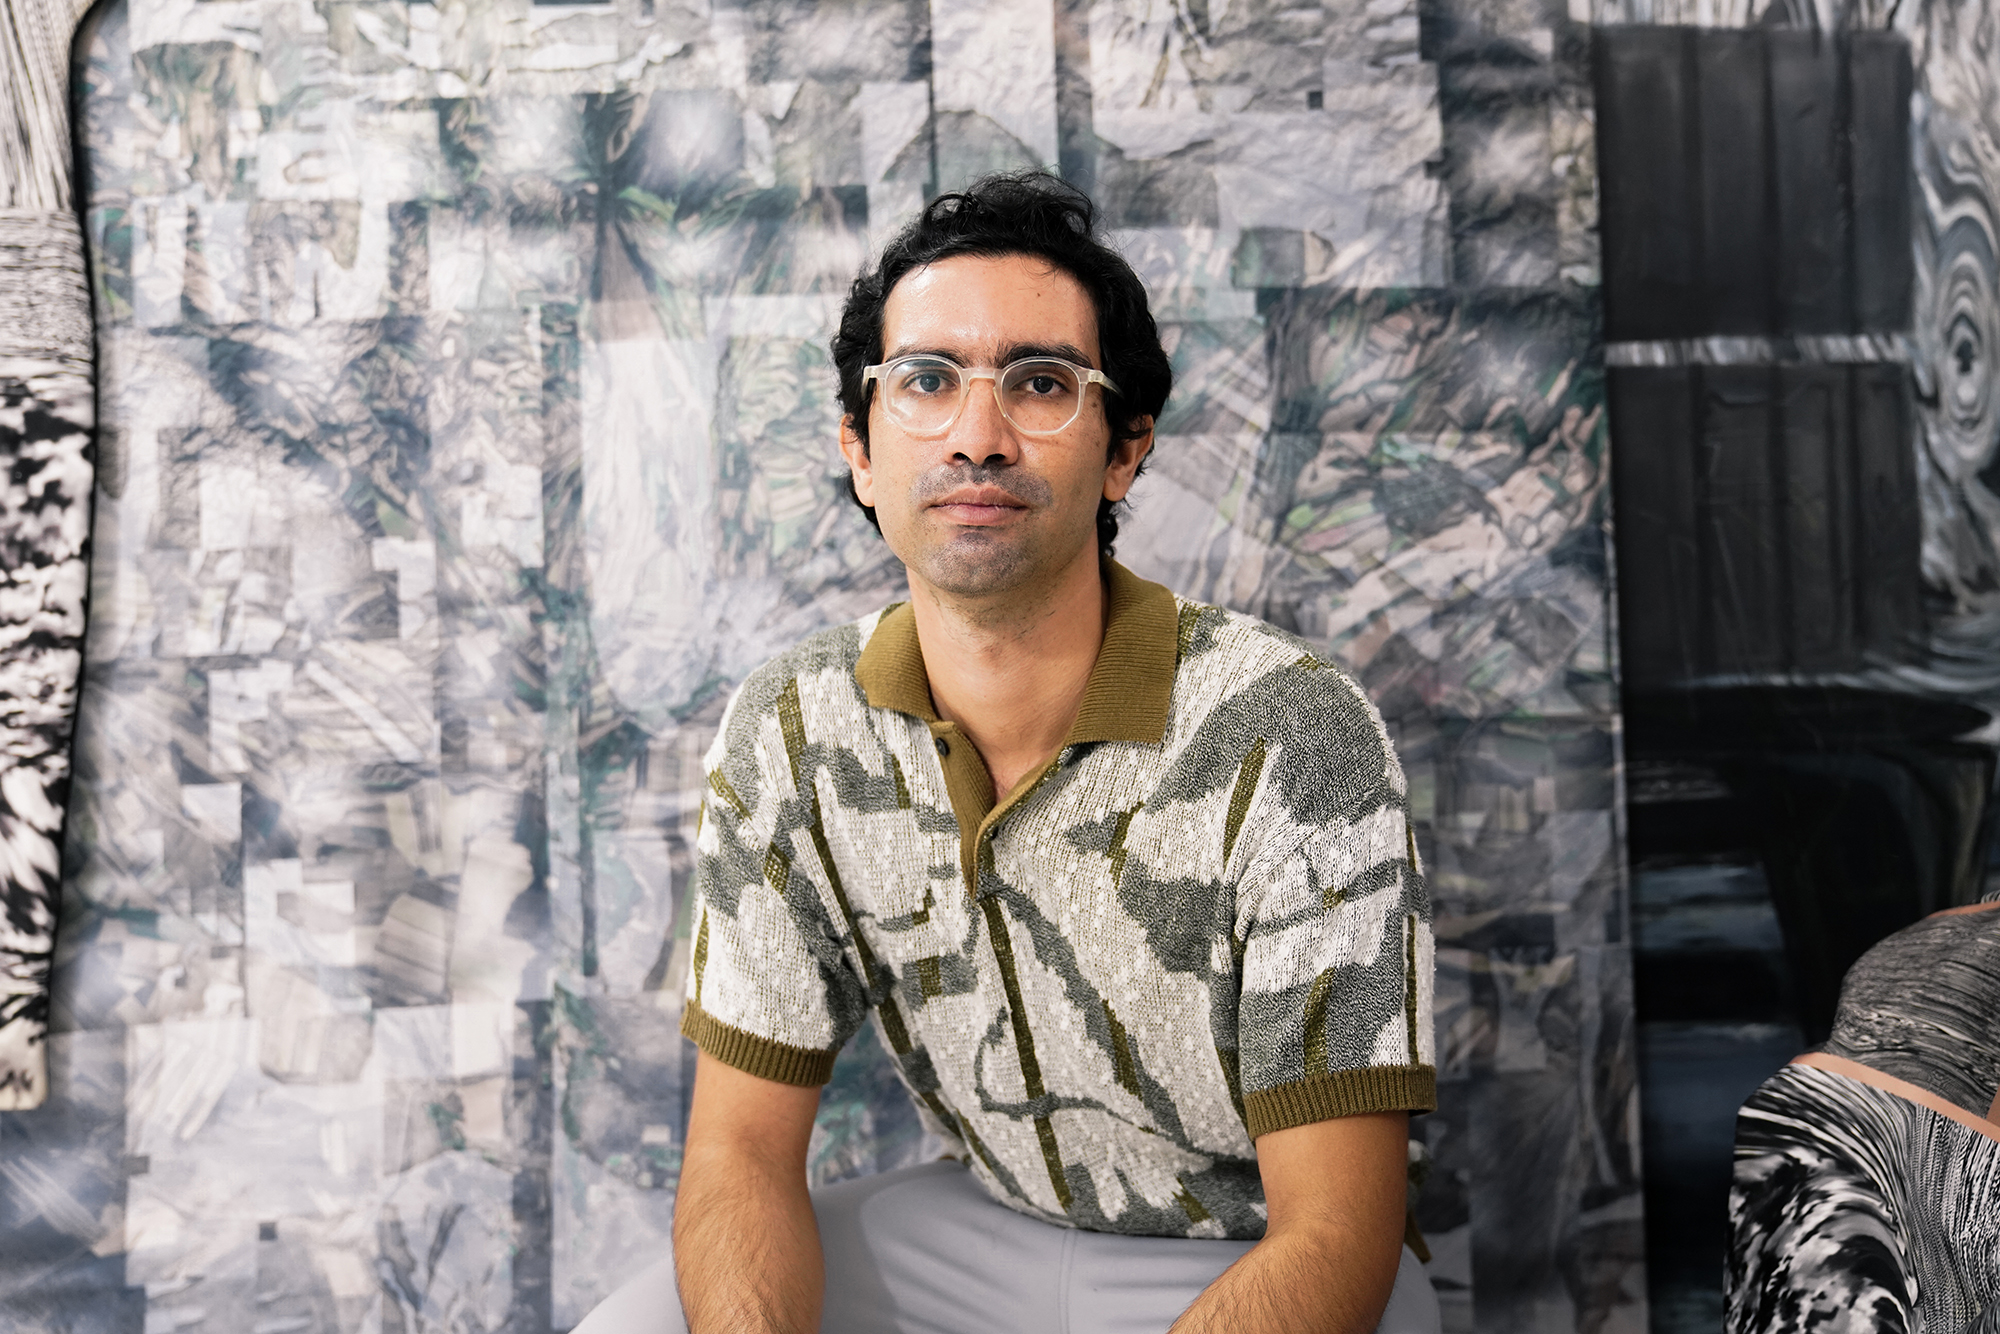 Image of artist Leo Castañeda in an olive great and beige patterned short sleeved button down shirt, against a great  